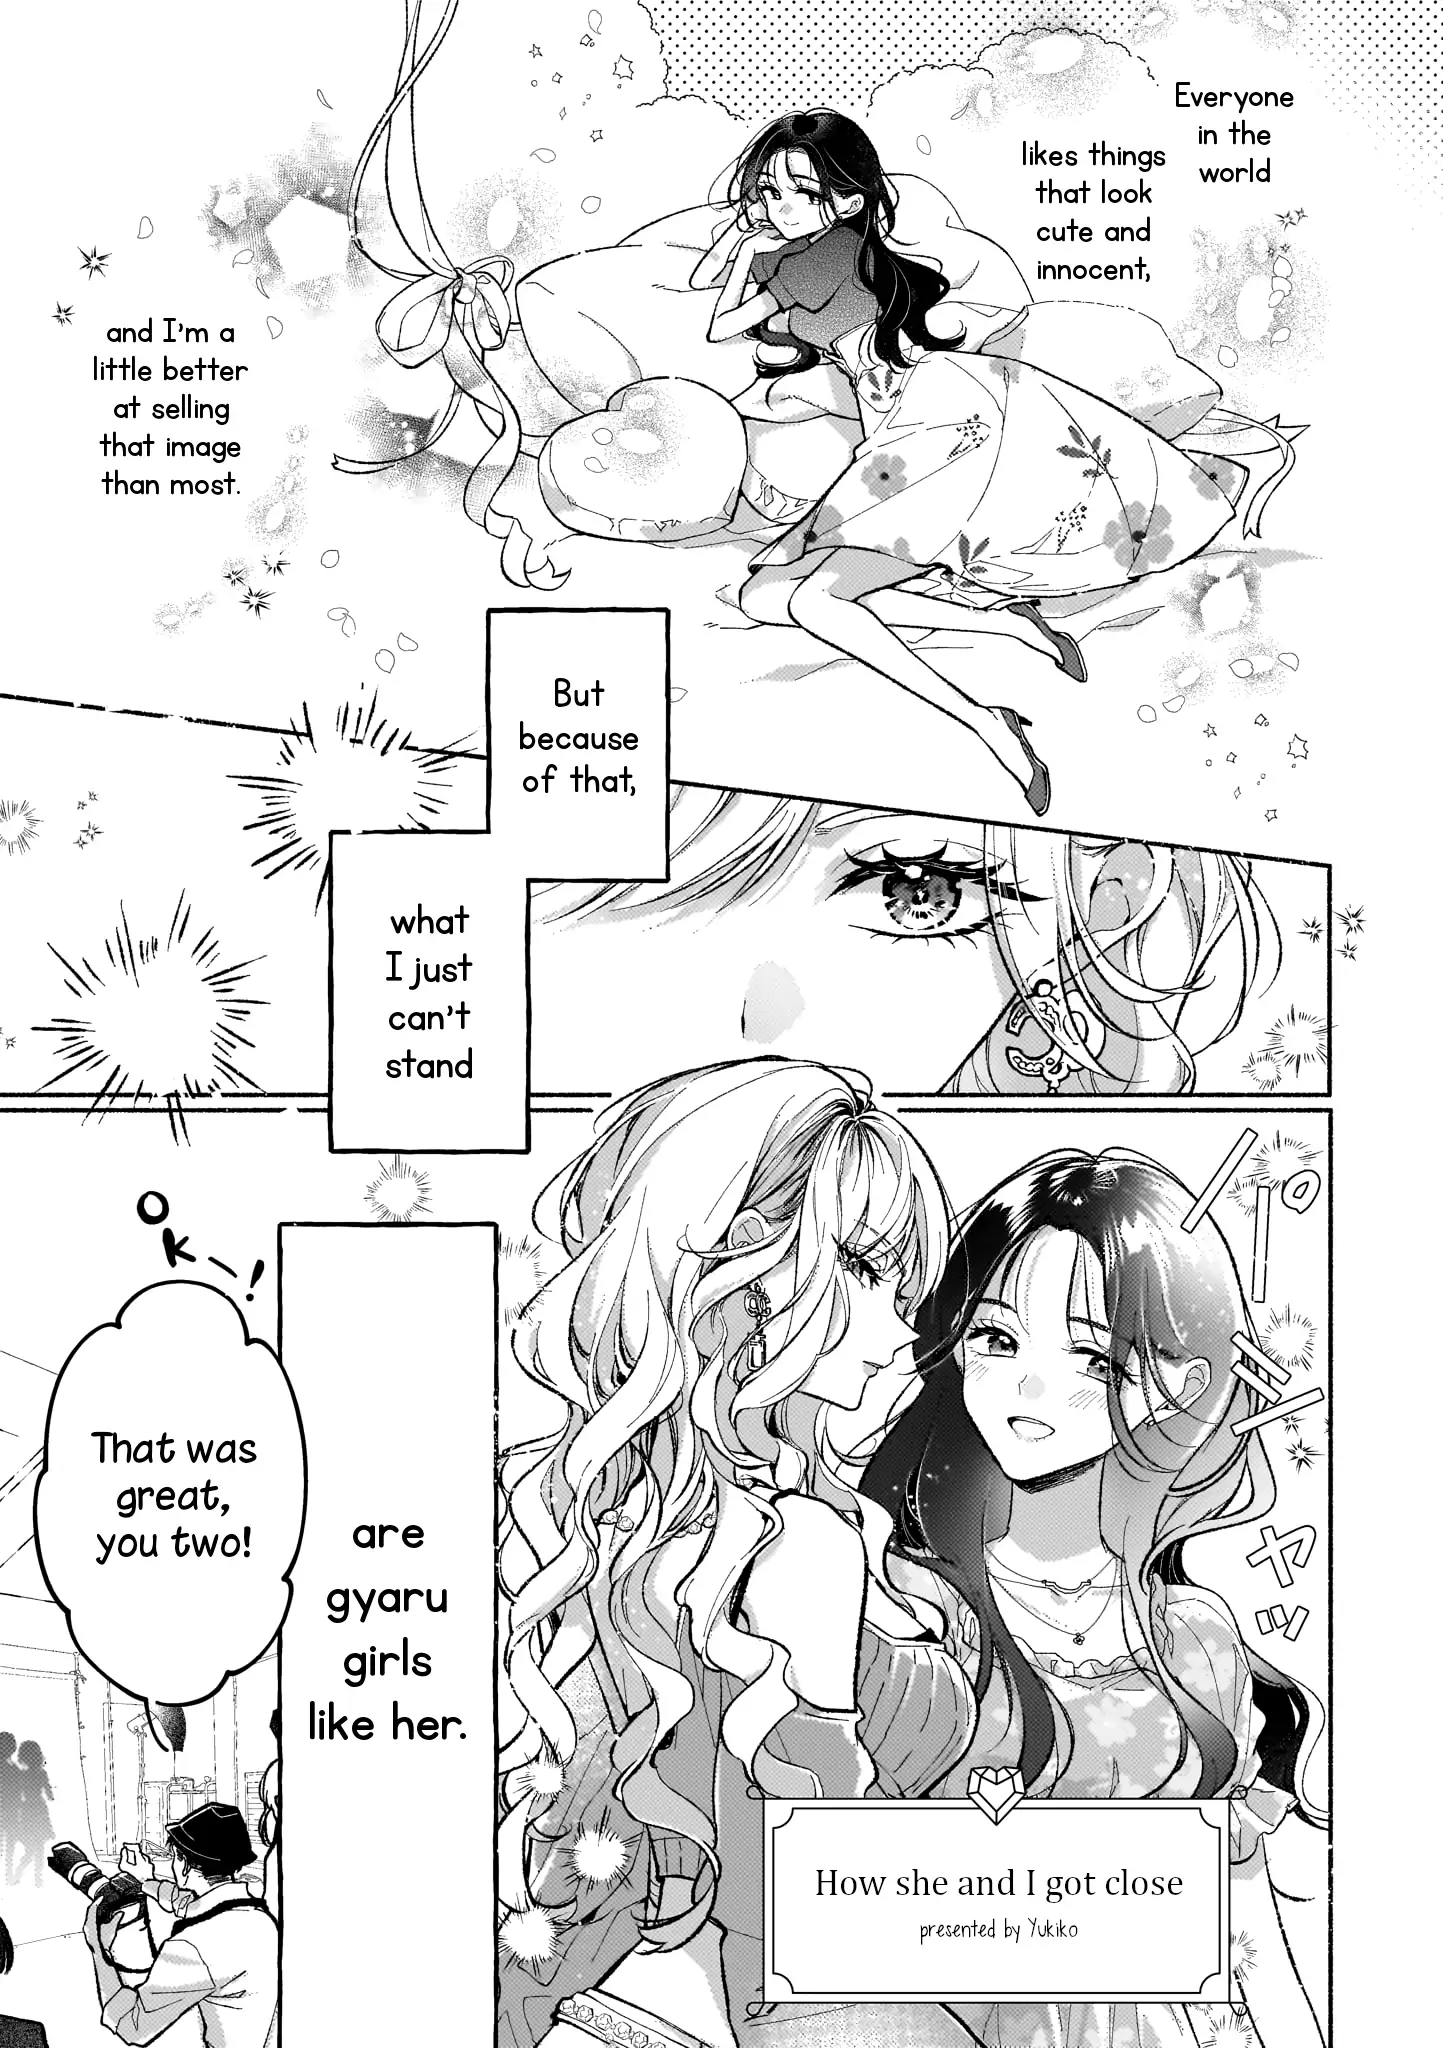 How She And I Got Close - Page 2